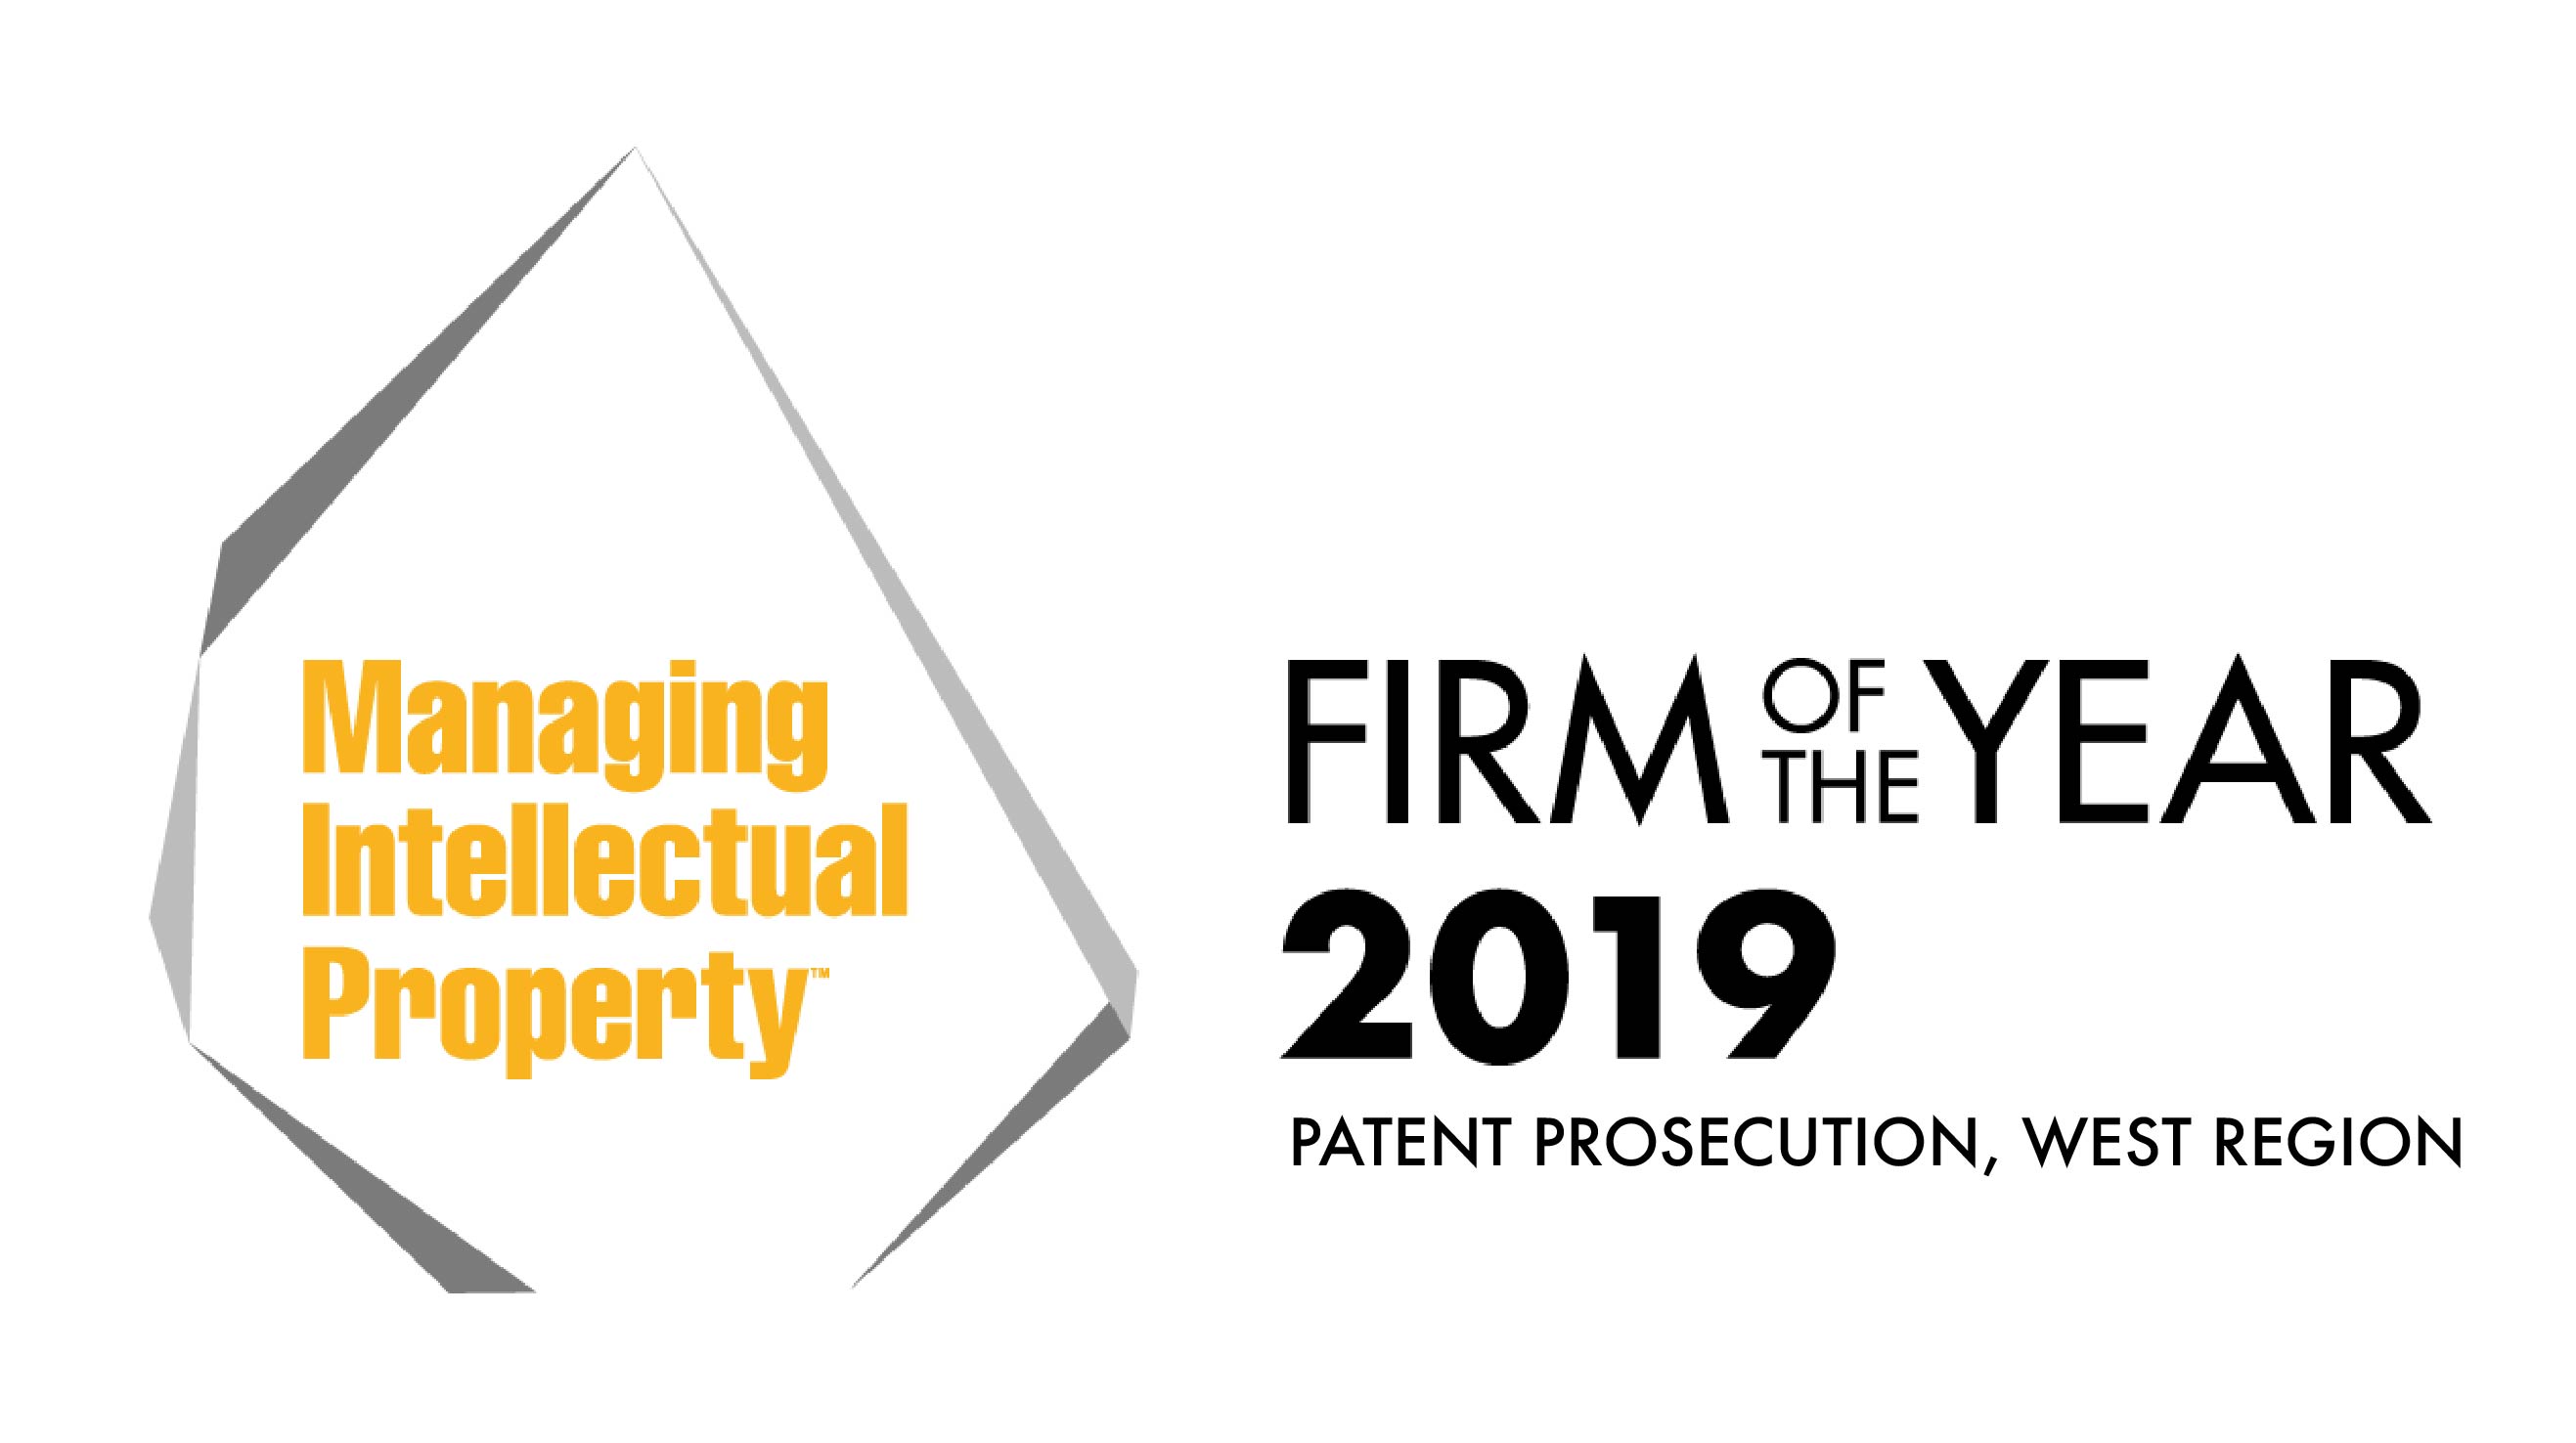 Managing Intellectual Property Firm of the Year 2019